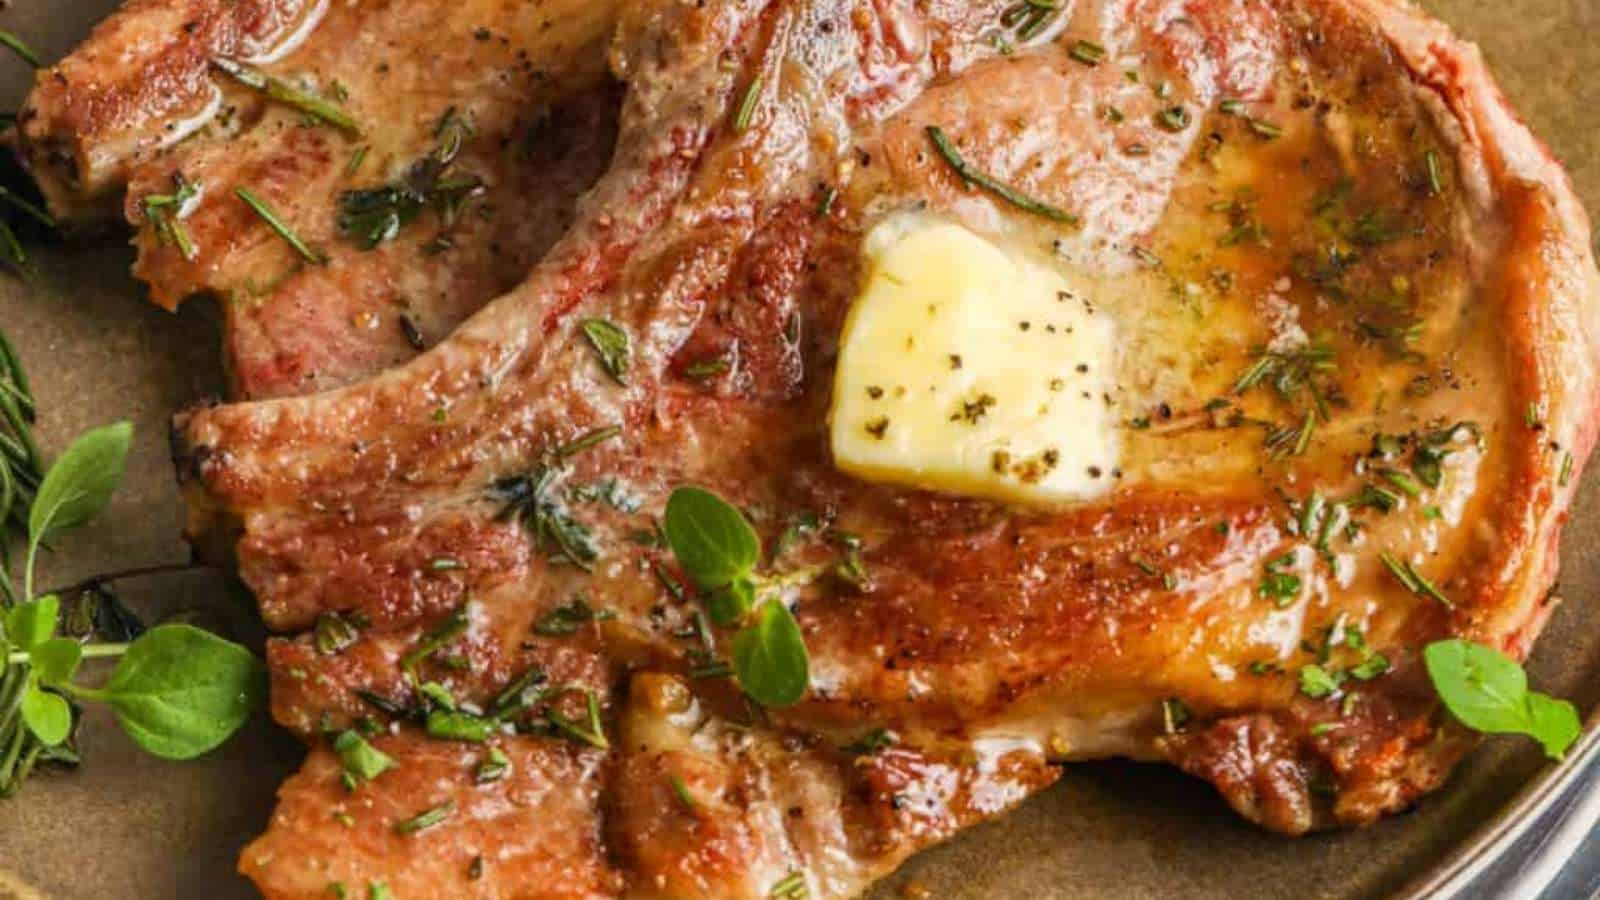 Pork chops on a plate with butter and sprigs of thyme.